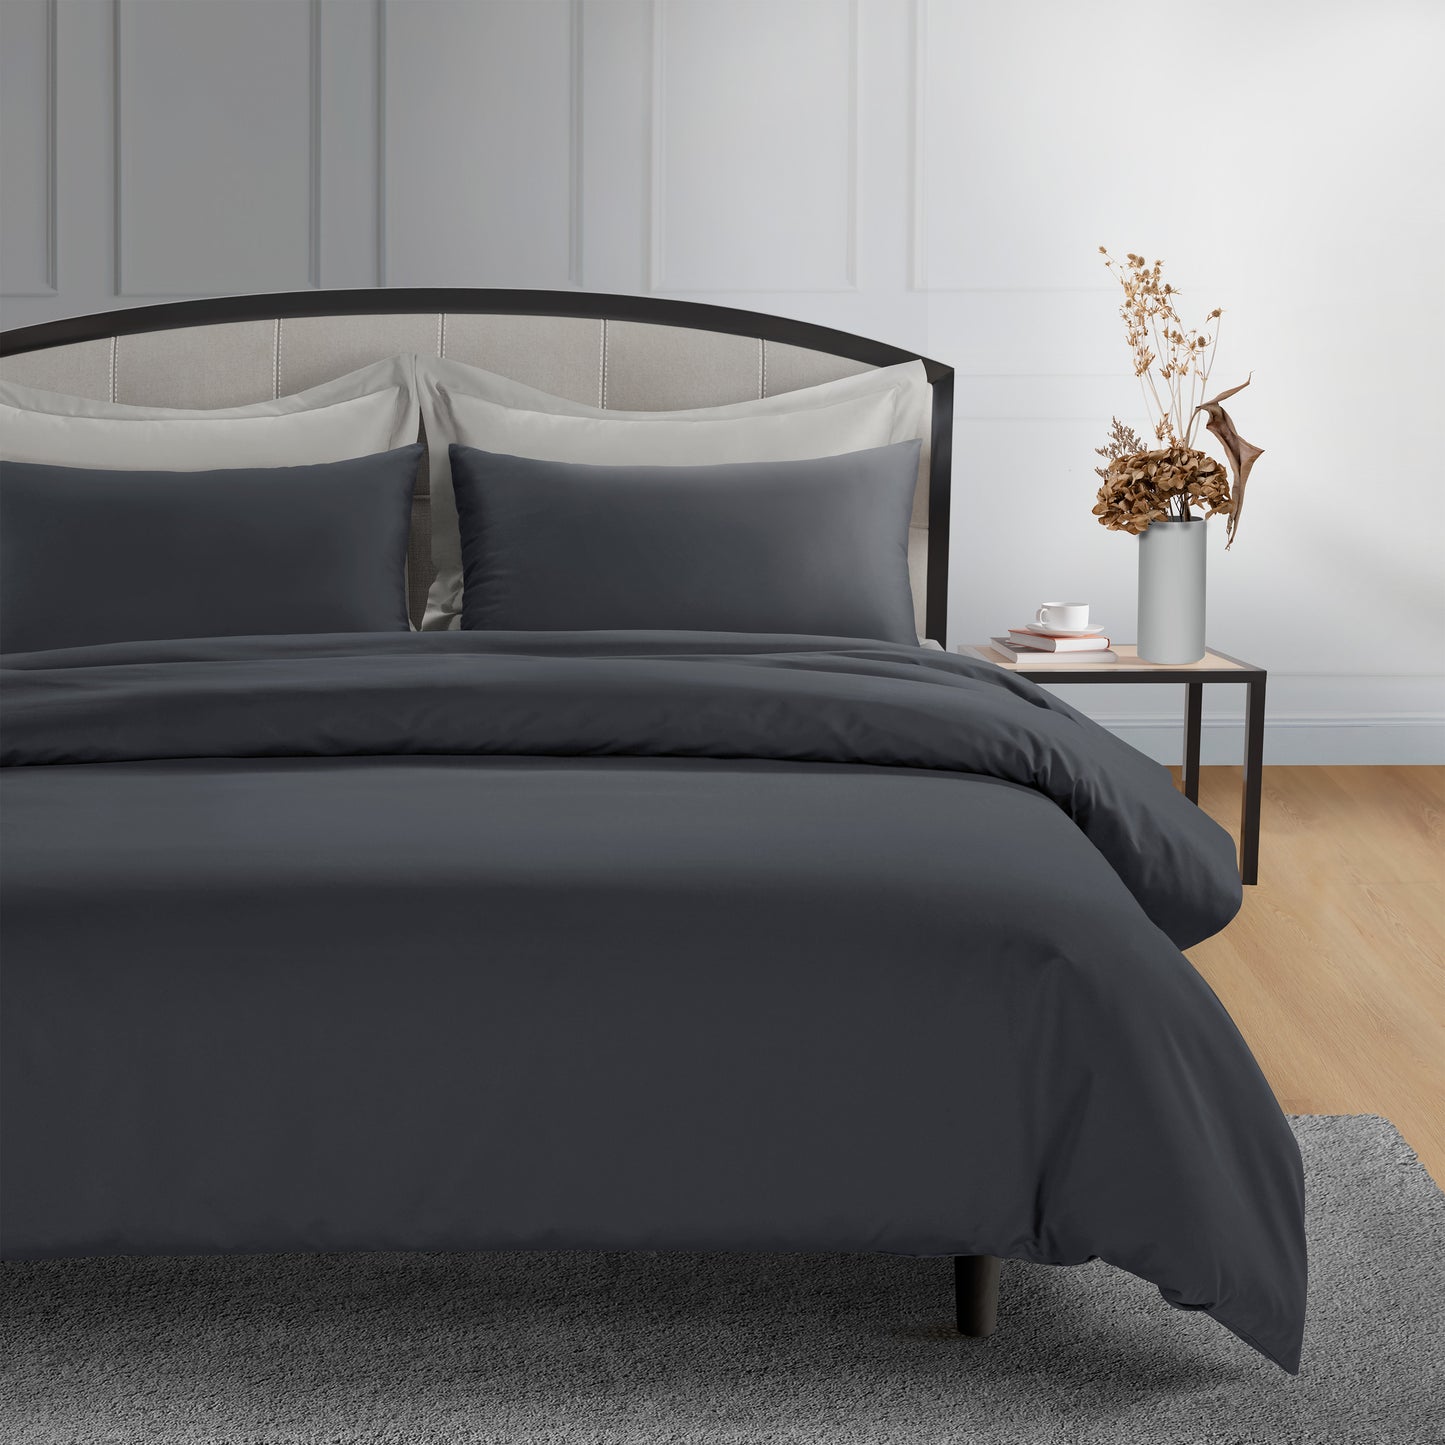 800 Thread Count Grand Splendour LUXE - Graphite Grey with Oyster Mushroom Bedding Set